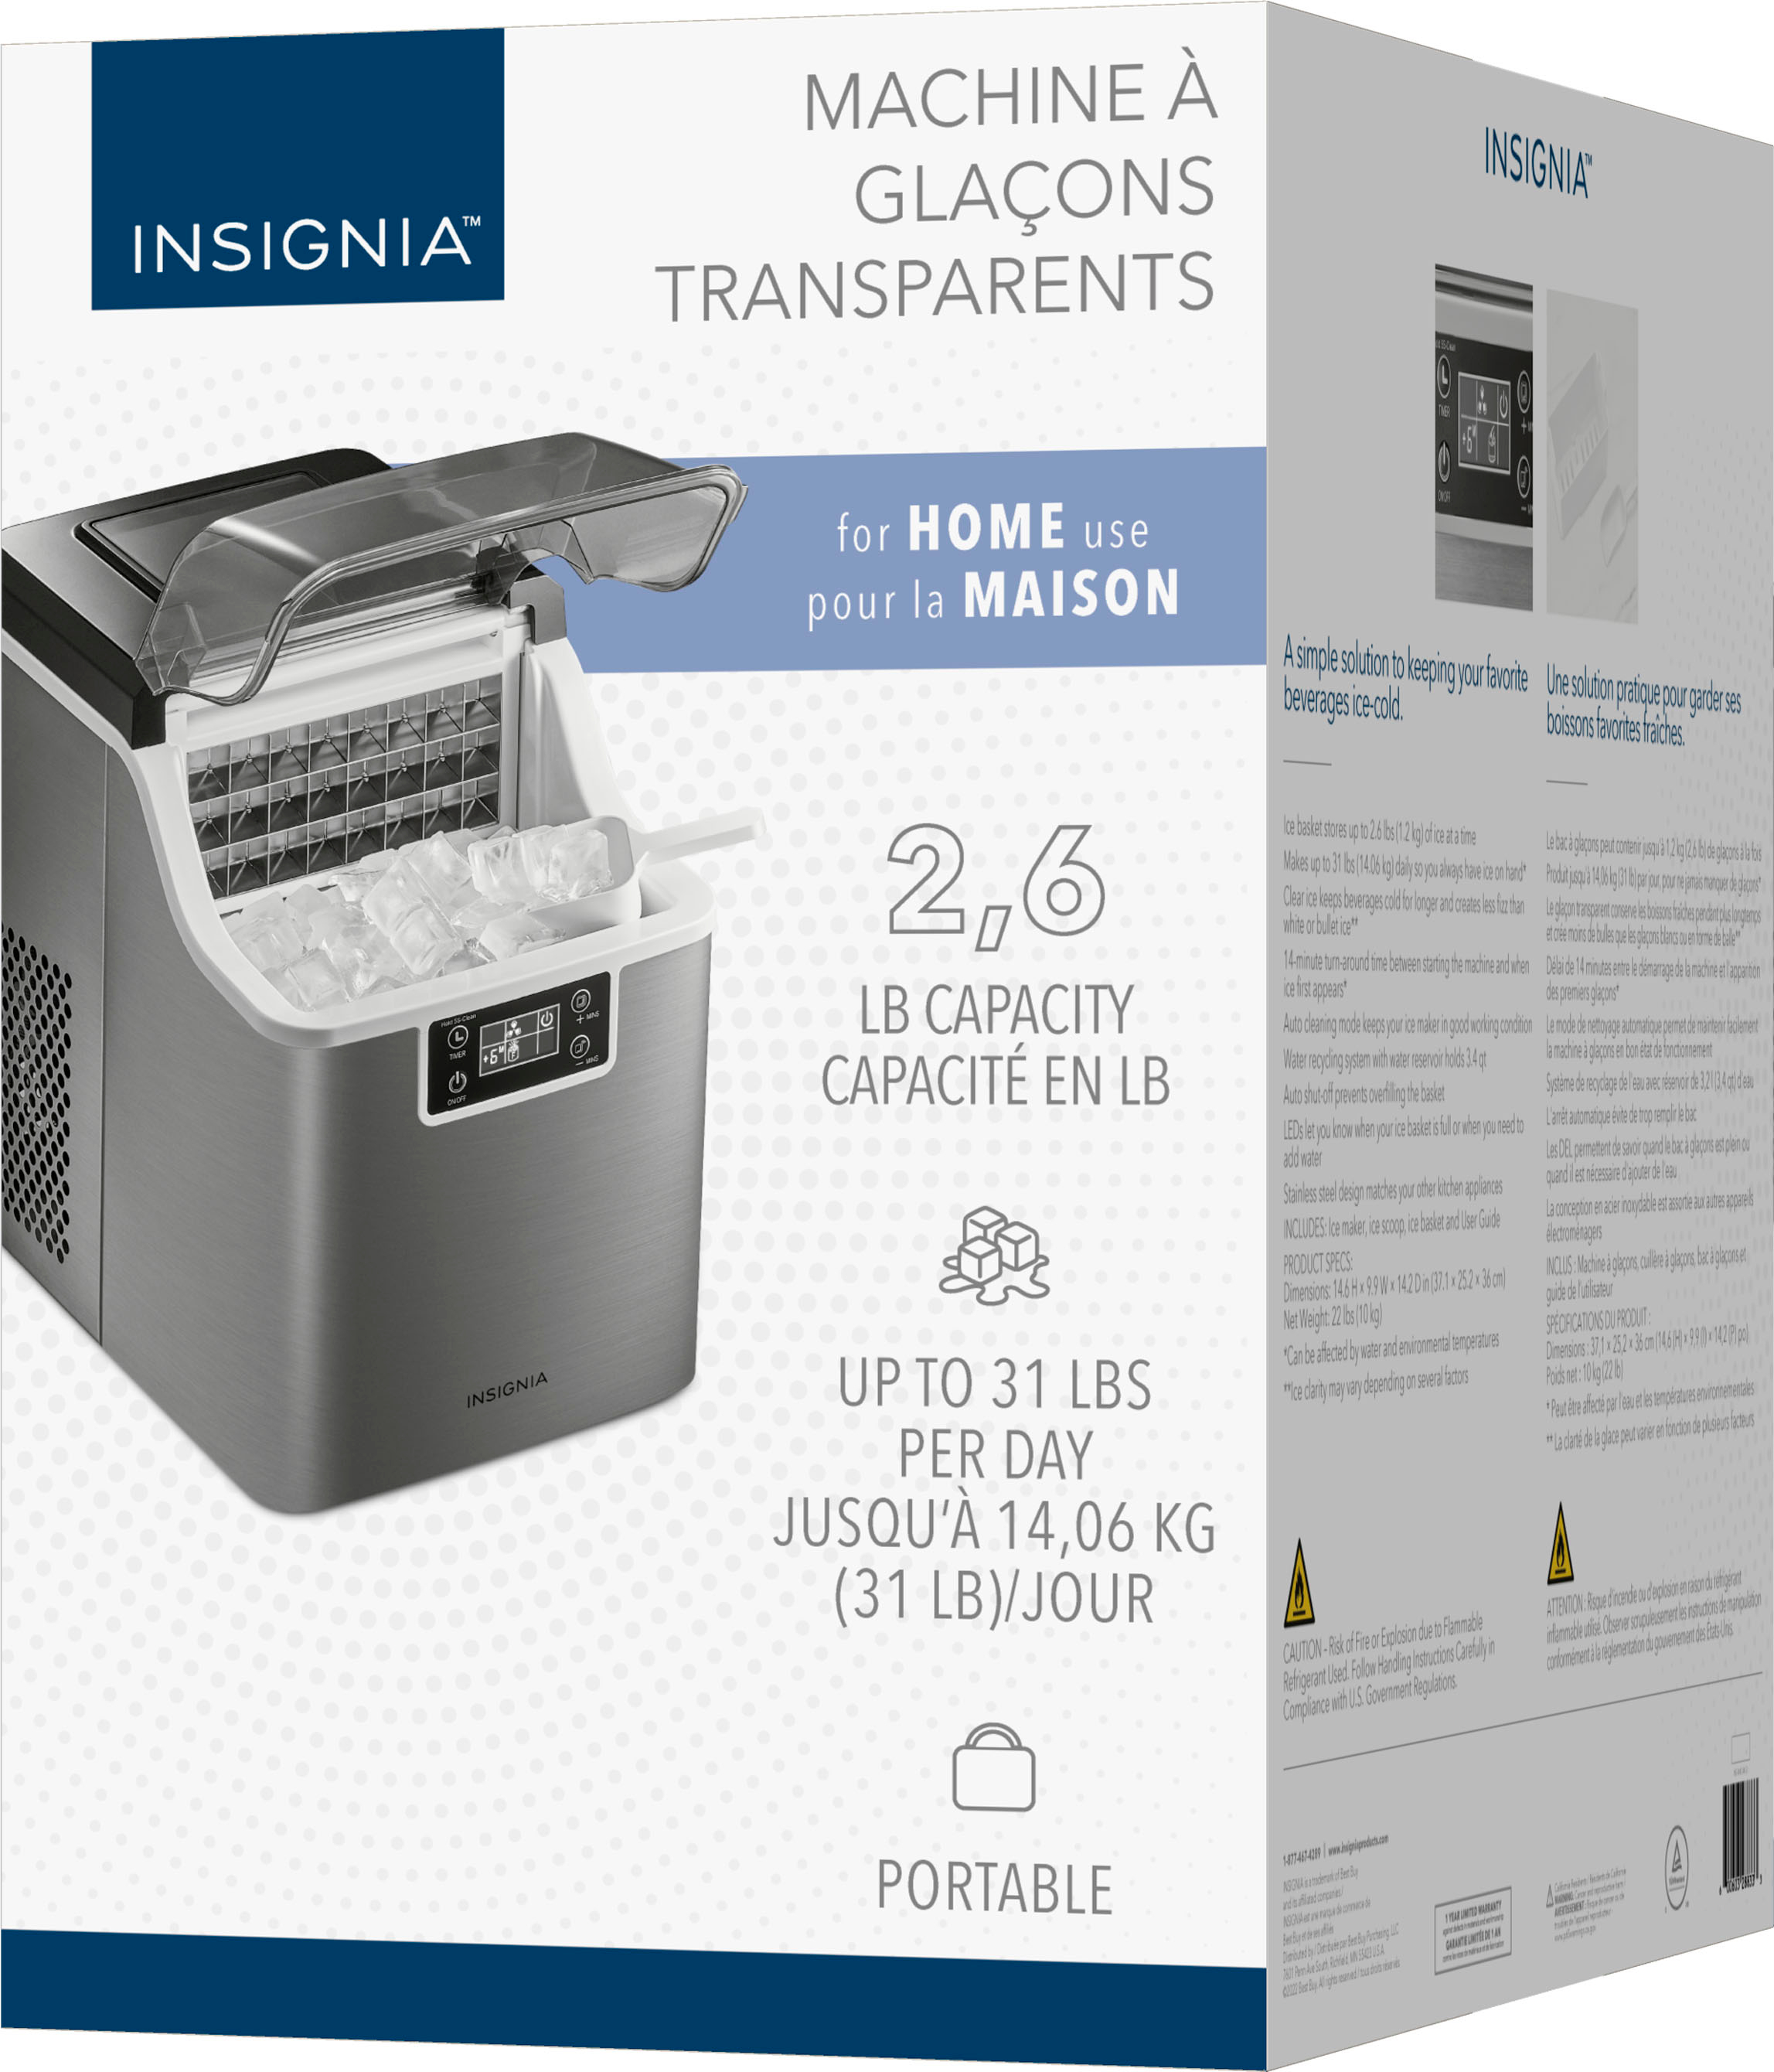 Portable Ice Maker review, Insignia brand. A Christmas gift from my sister.  